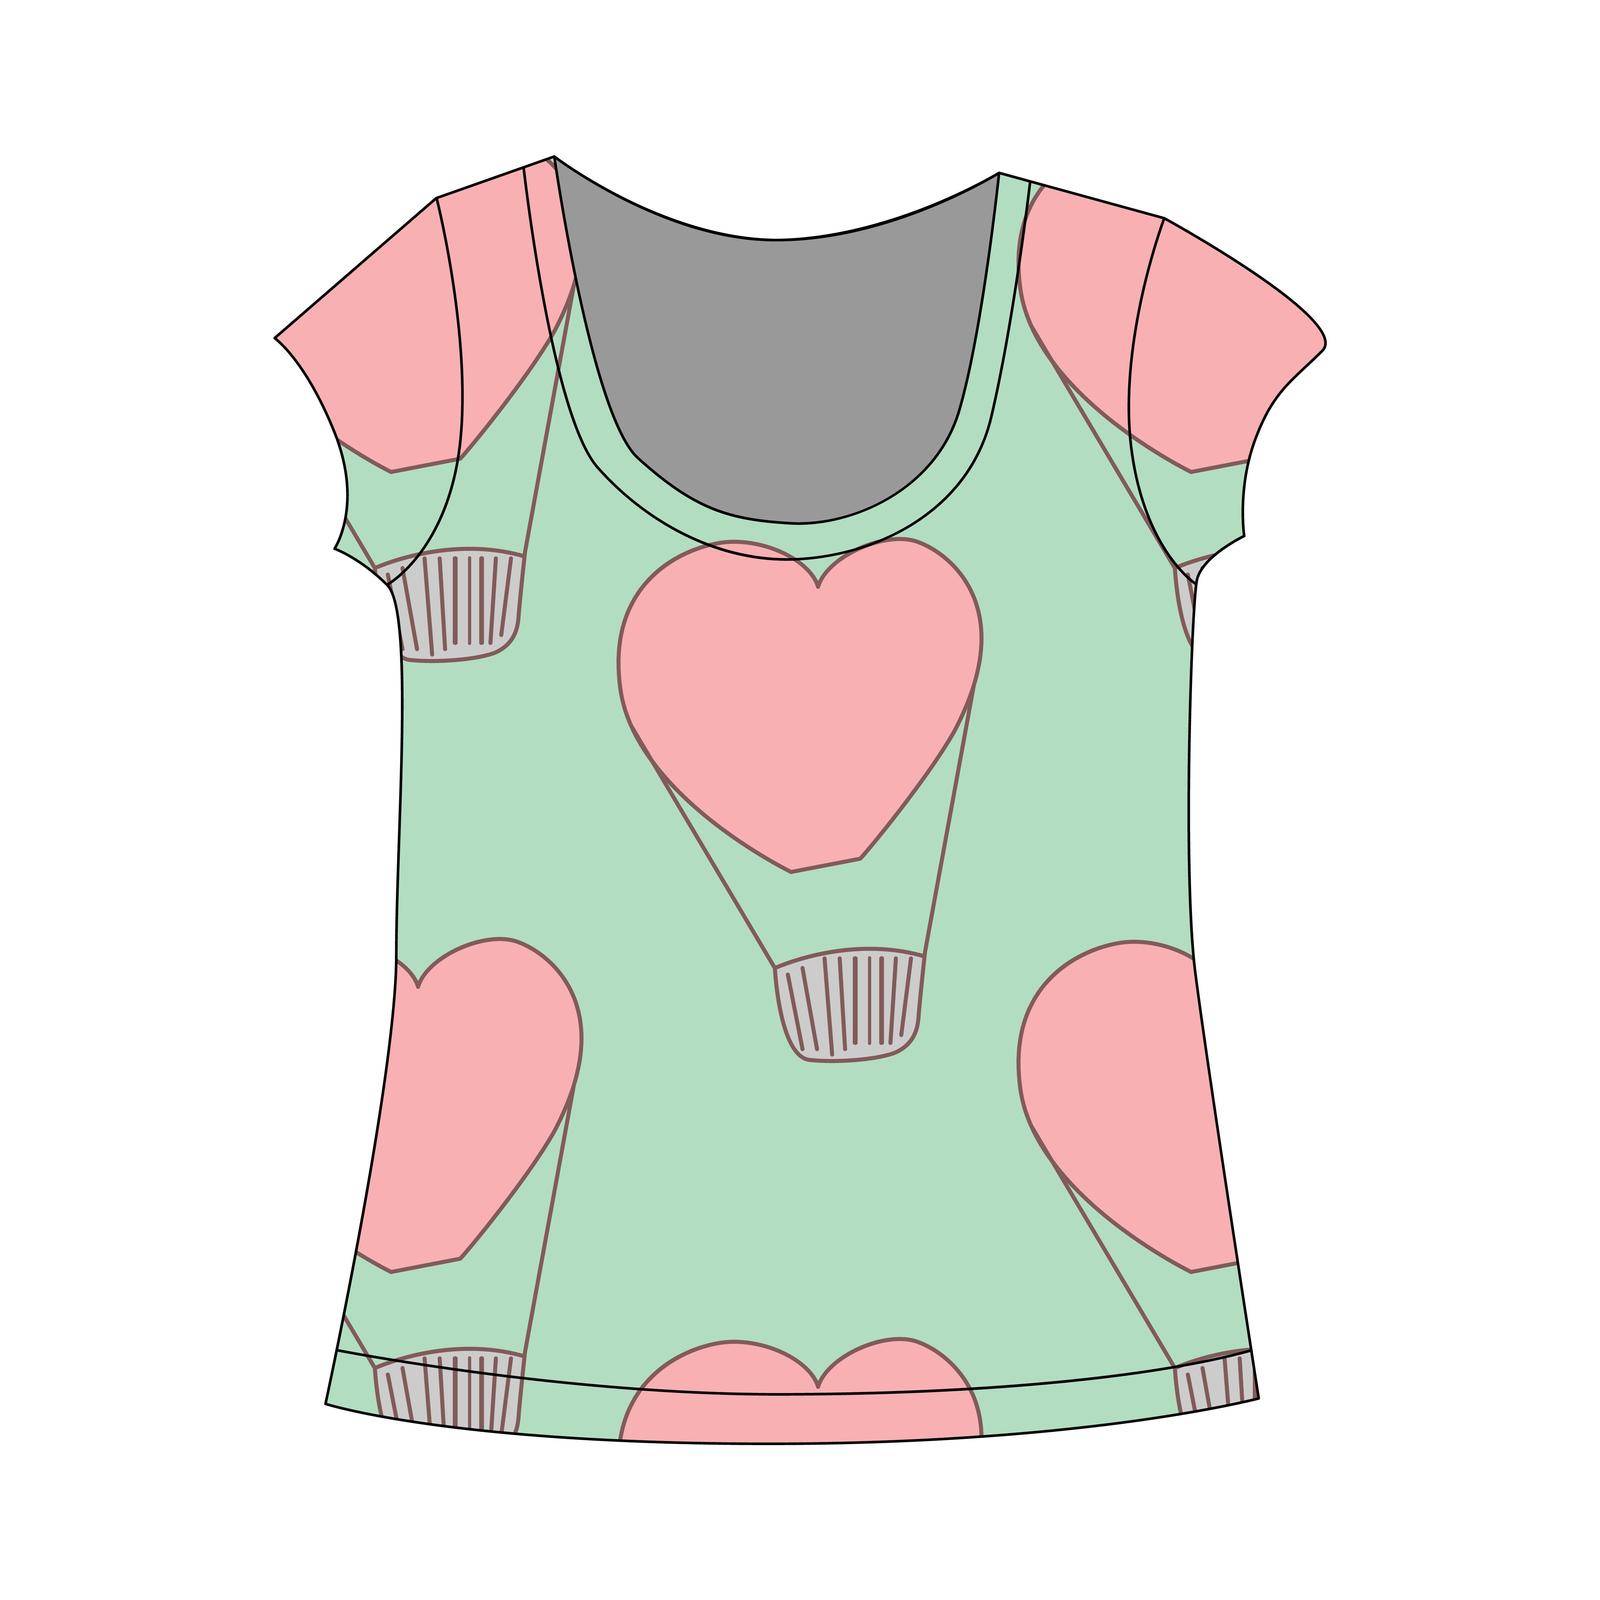 T-shirt template with hearts in boho style - for t-shirt, textile, wrapping paper. Vector illustration